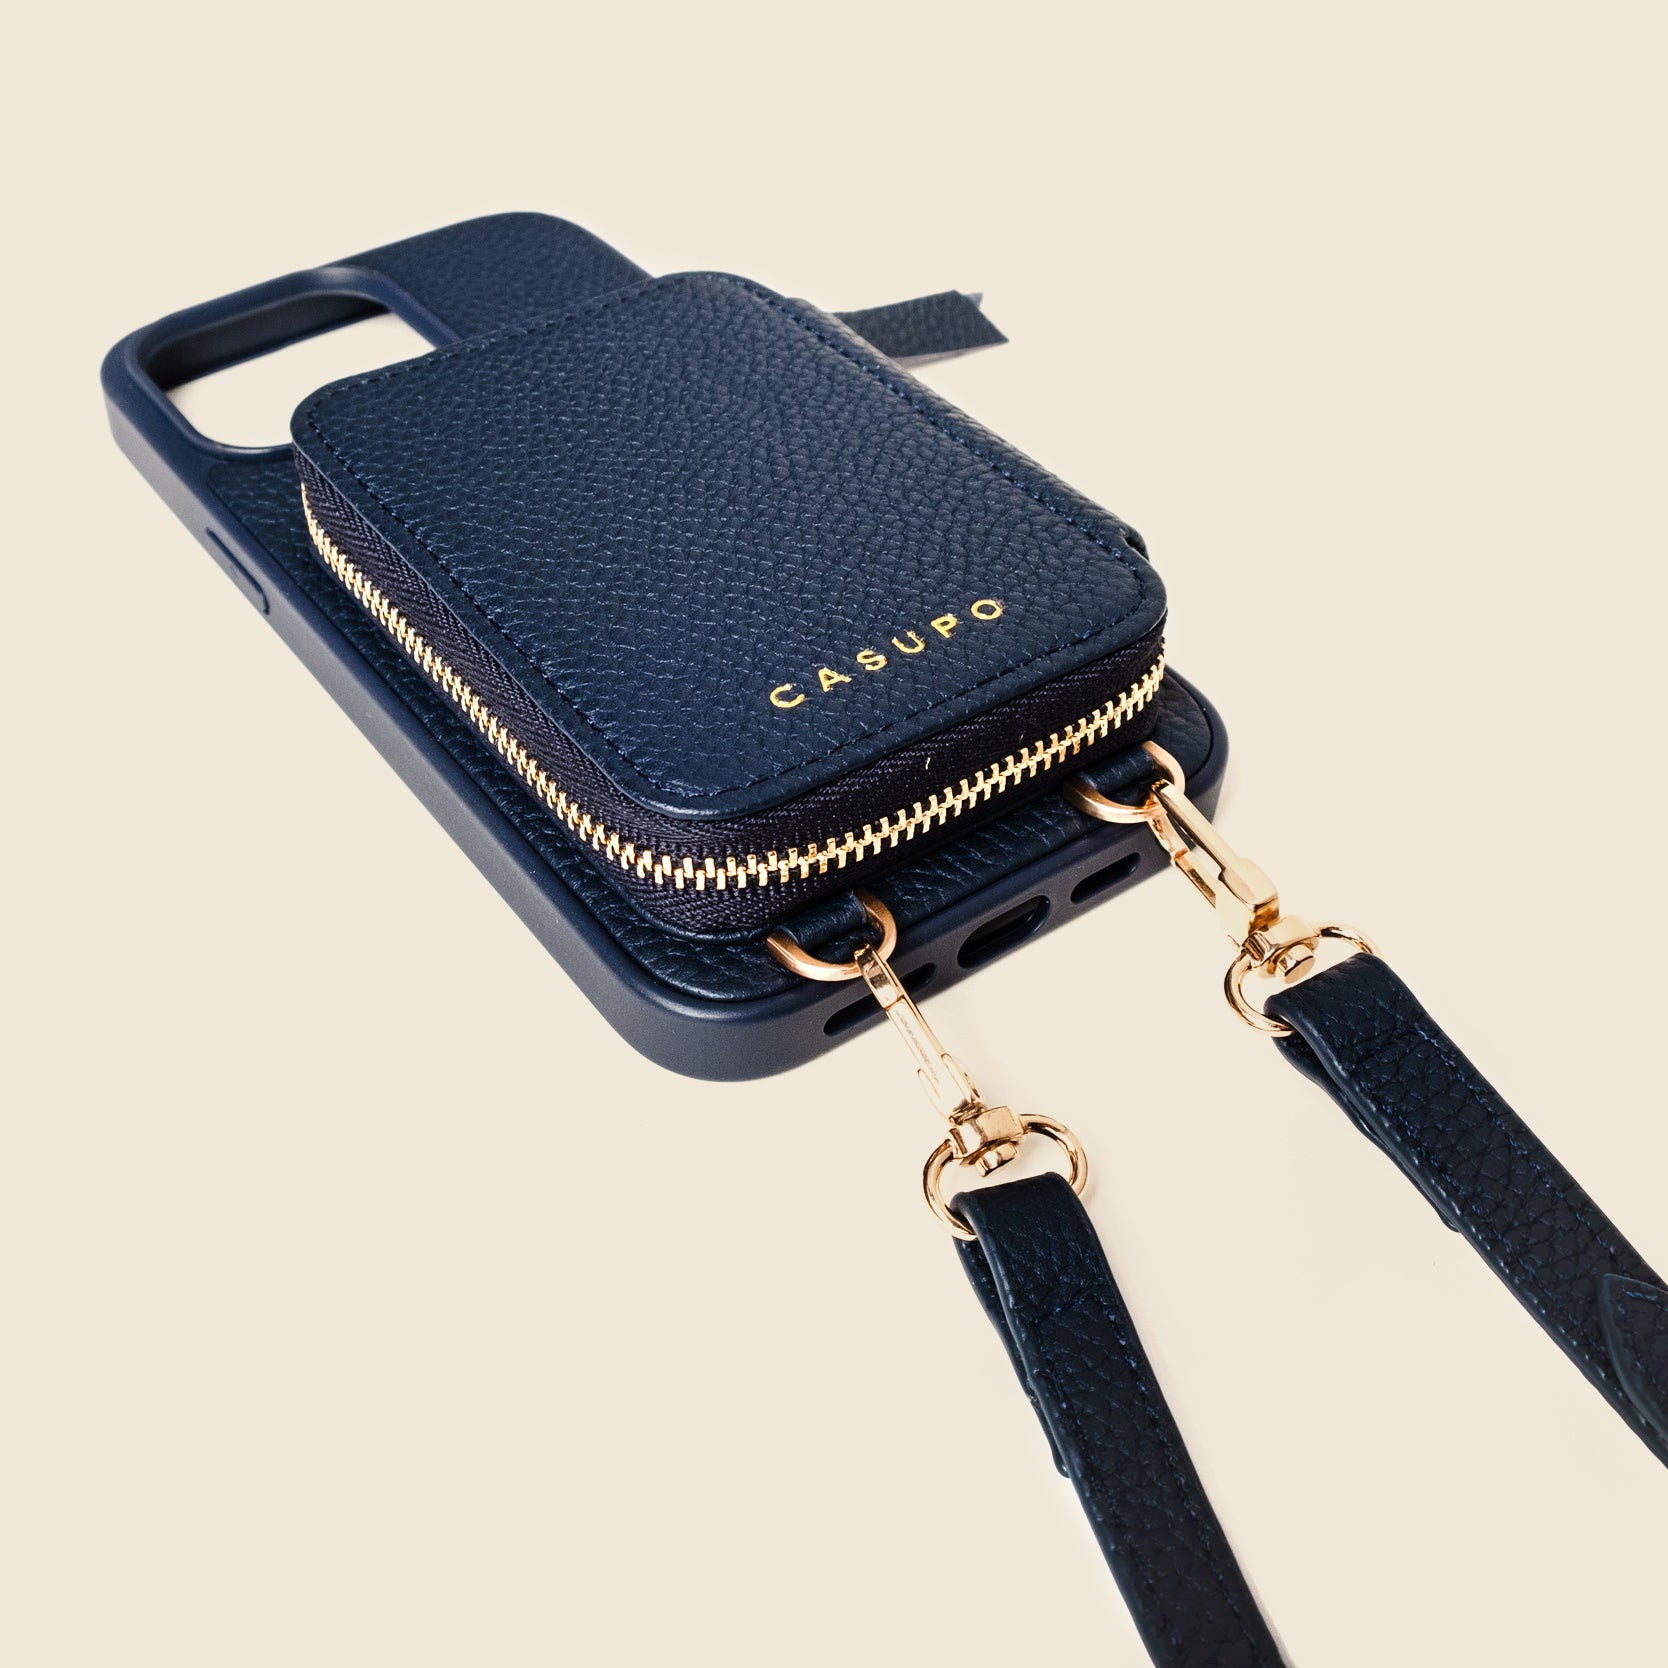 Navy blue leather iphone case bandolier wallet bag with crossbody strap